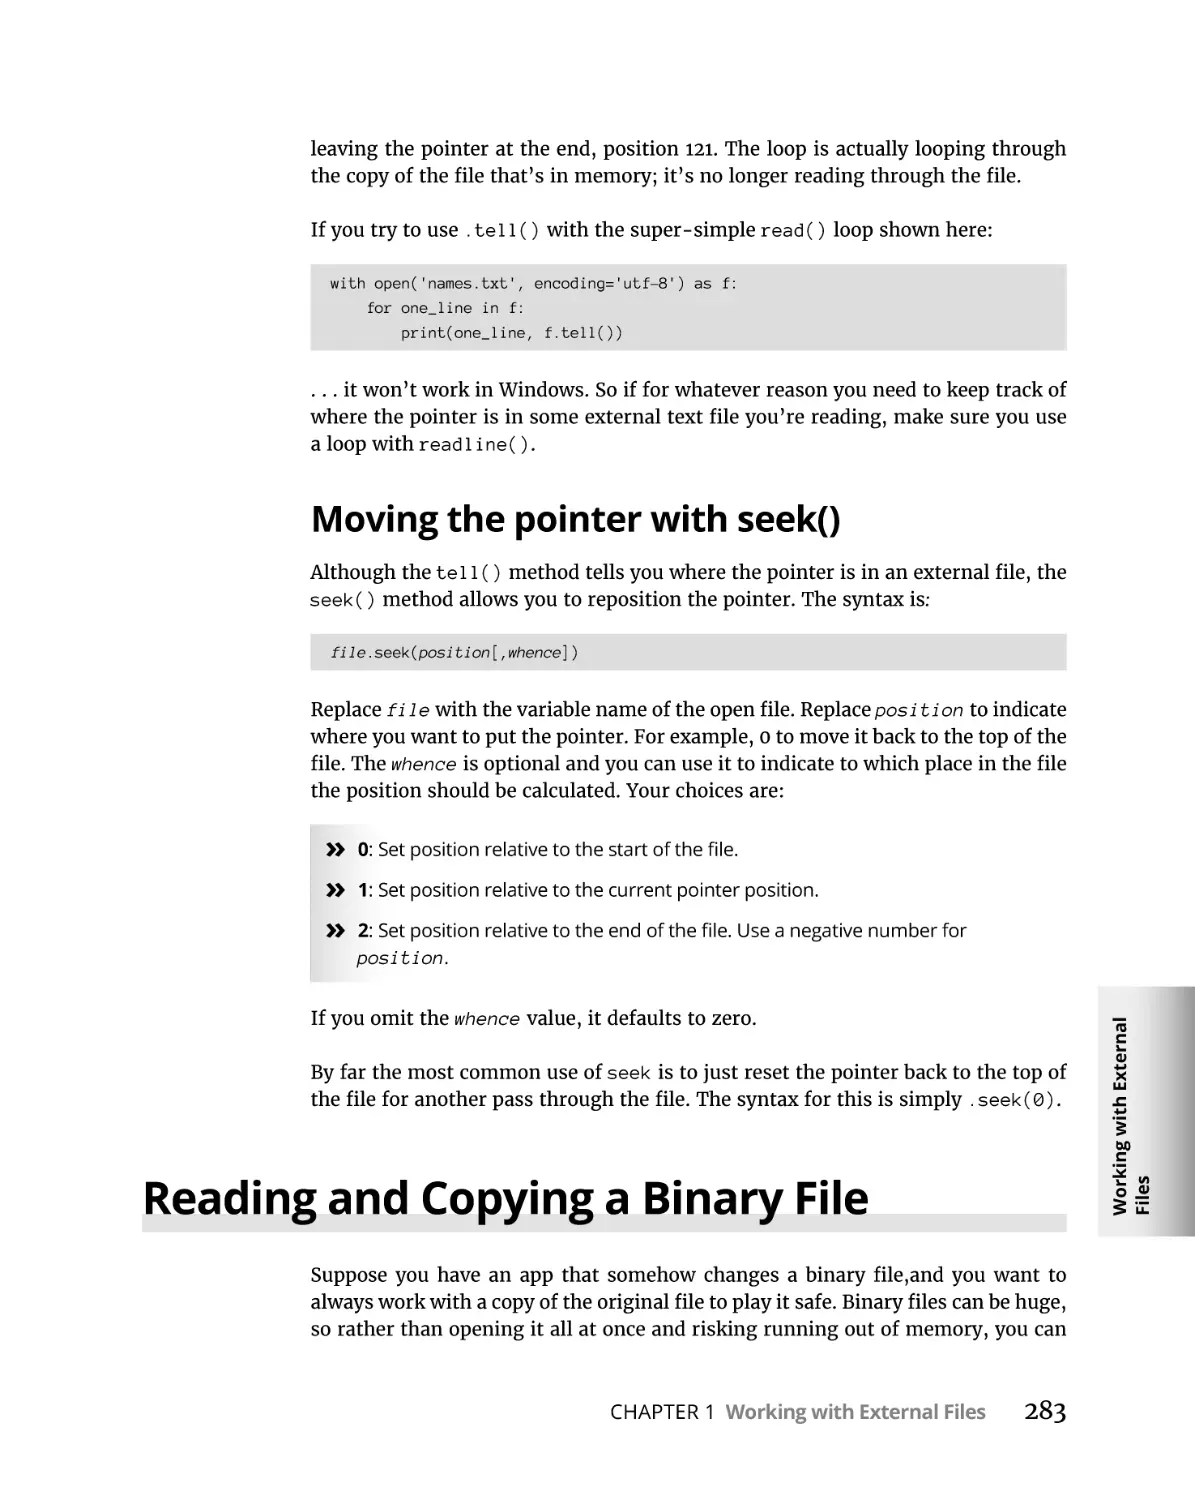 Moving the pointer with seek()
Reading and Copying a Binary File